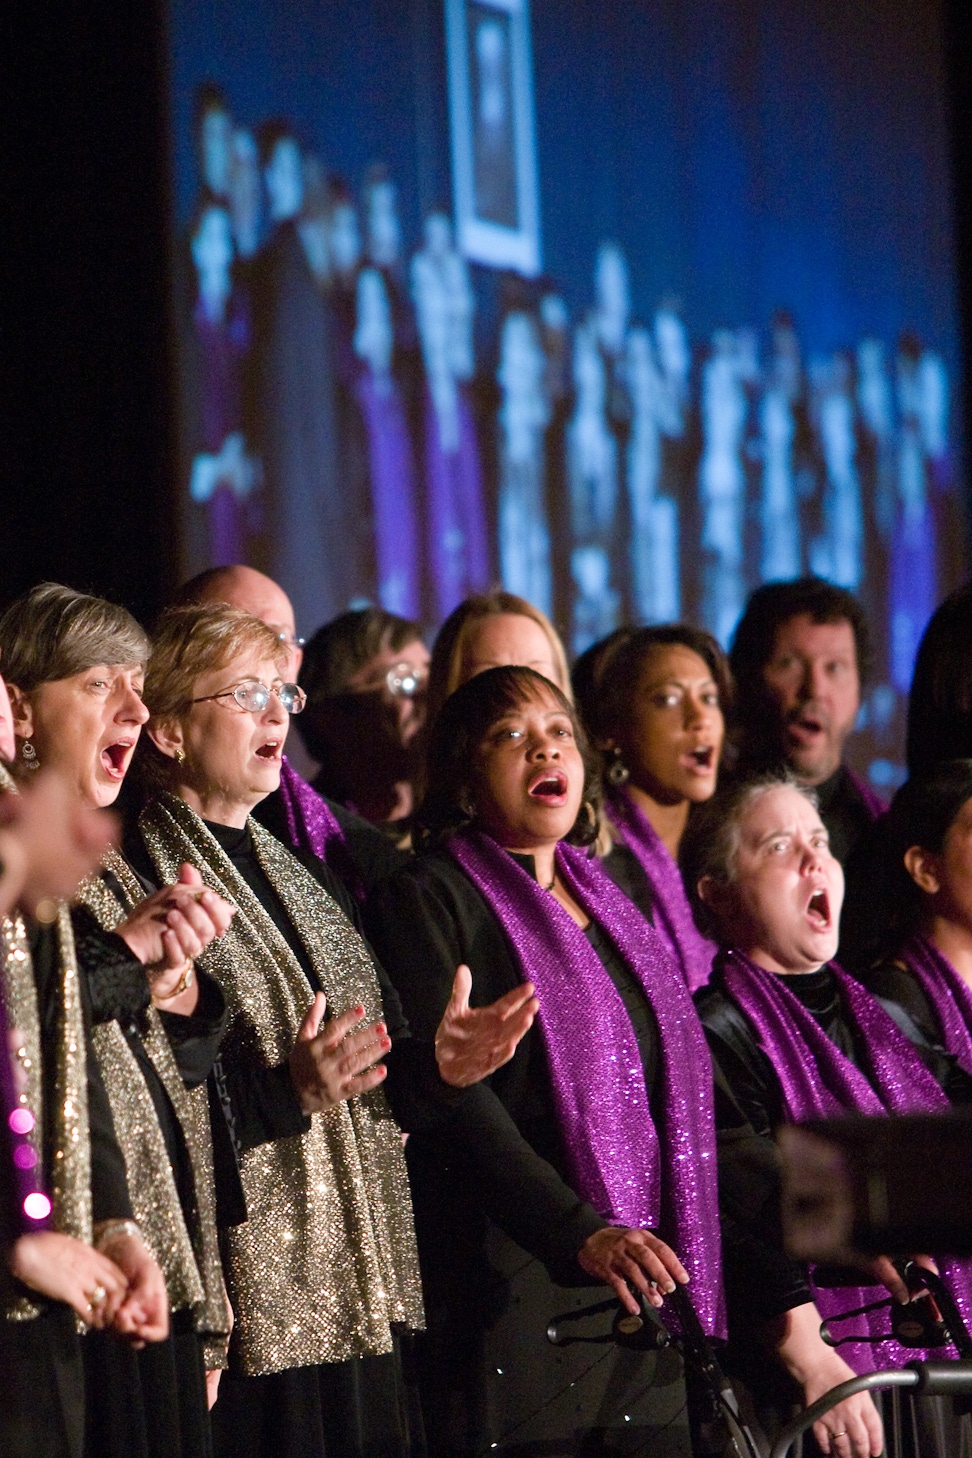 Chicago, United States, the Bahá'í House of Worship Choir performs at one of 41 Regional Conferences held around the world called by the Universal House of Justice, 6 December 2008